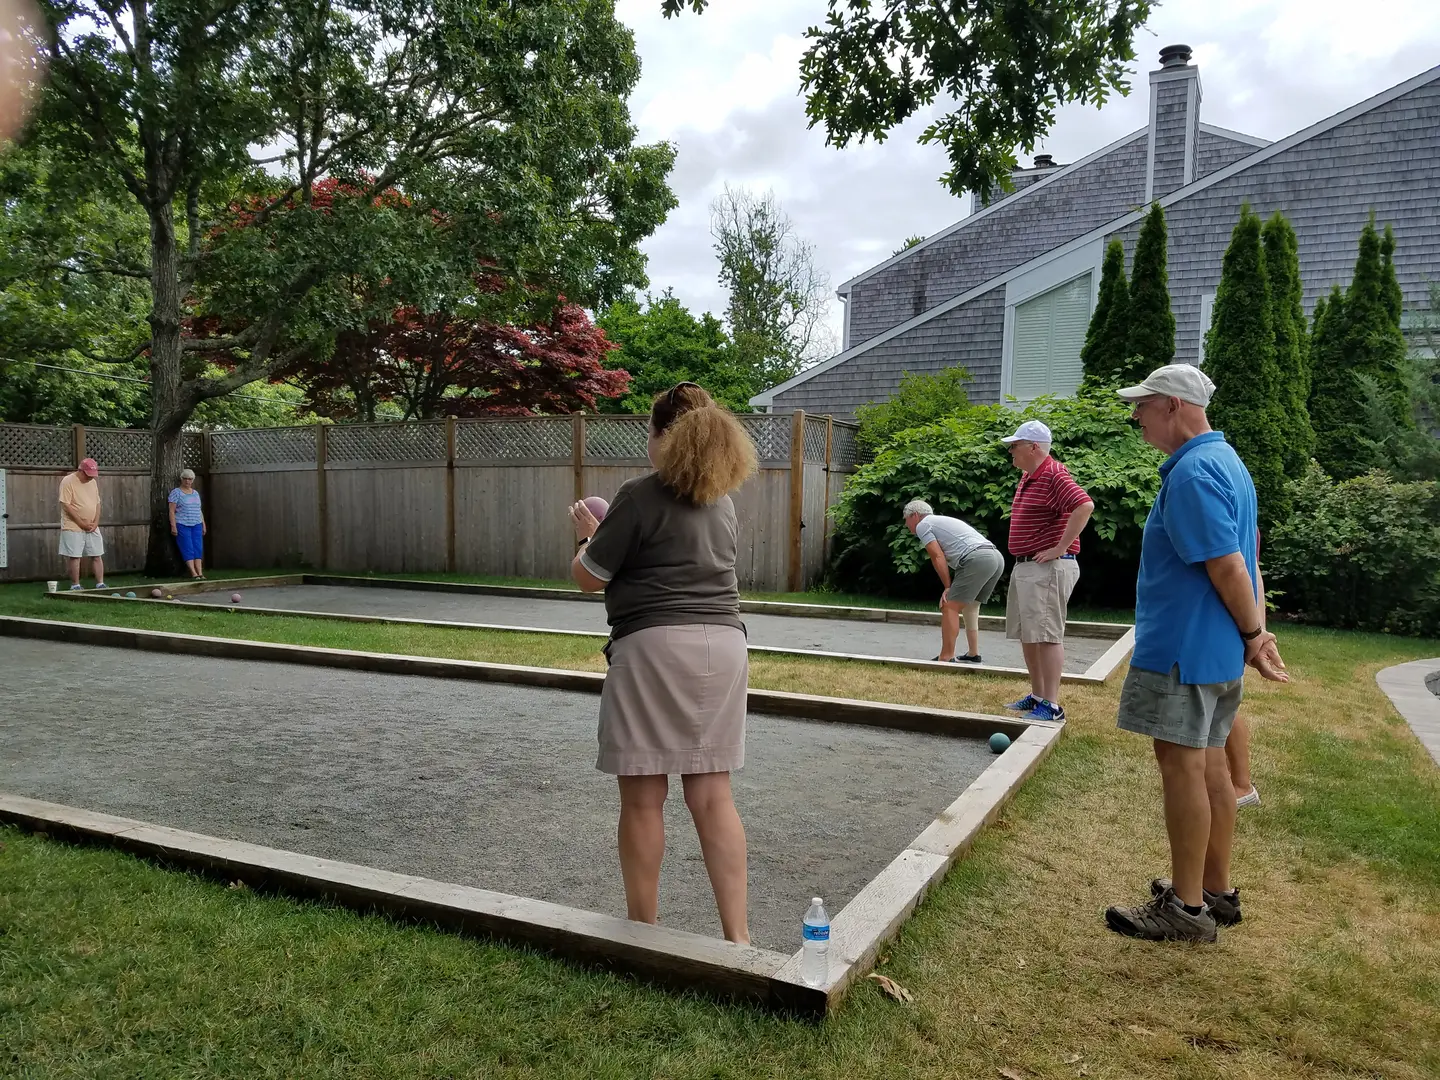 A group of people playing bocce ball in the backyard.